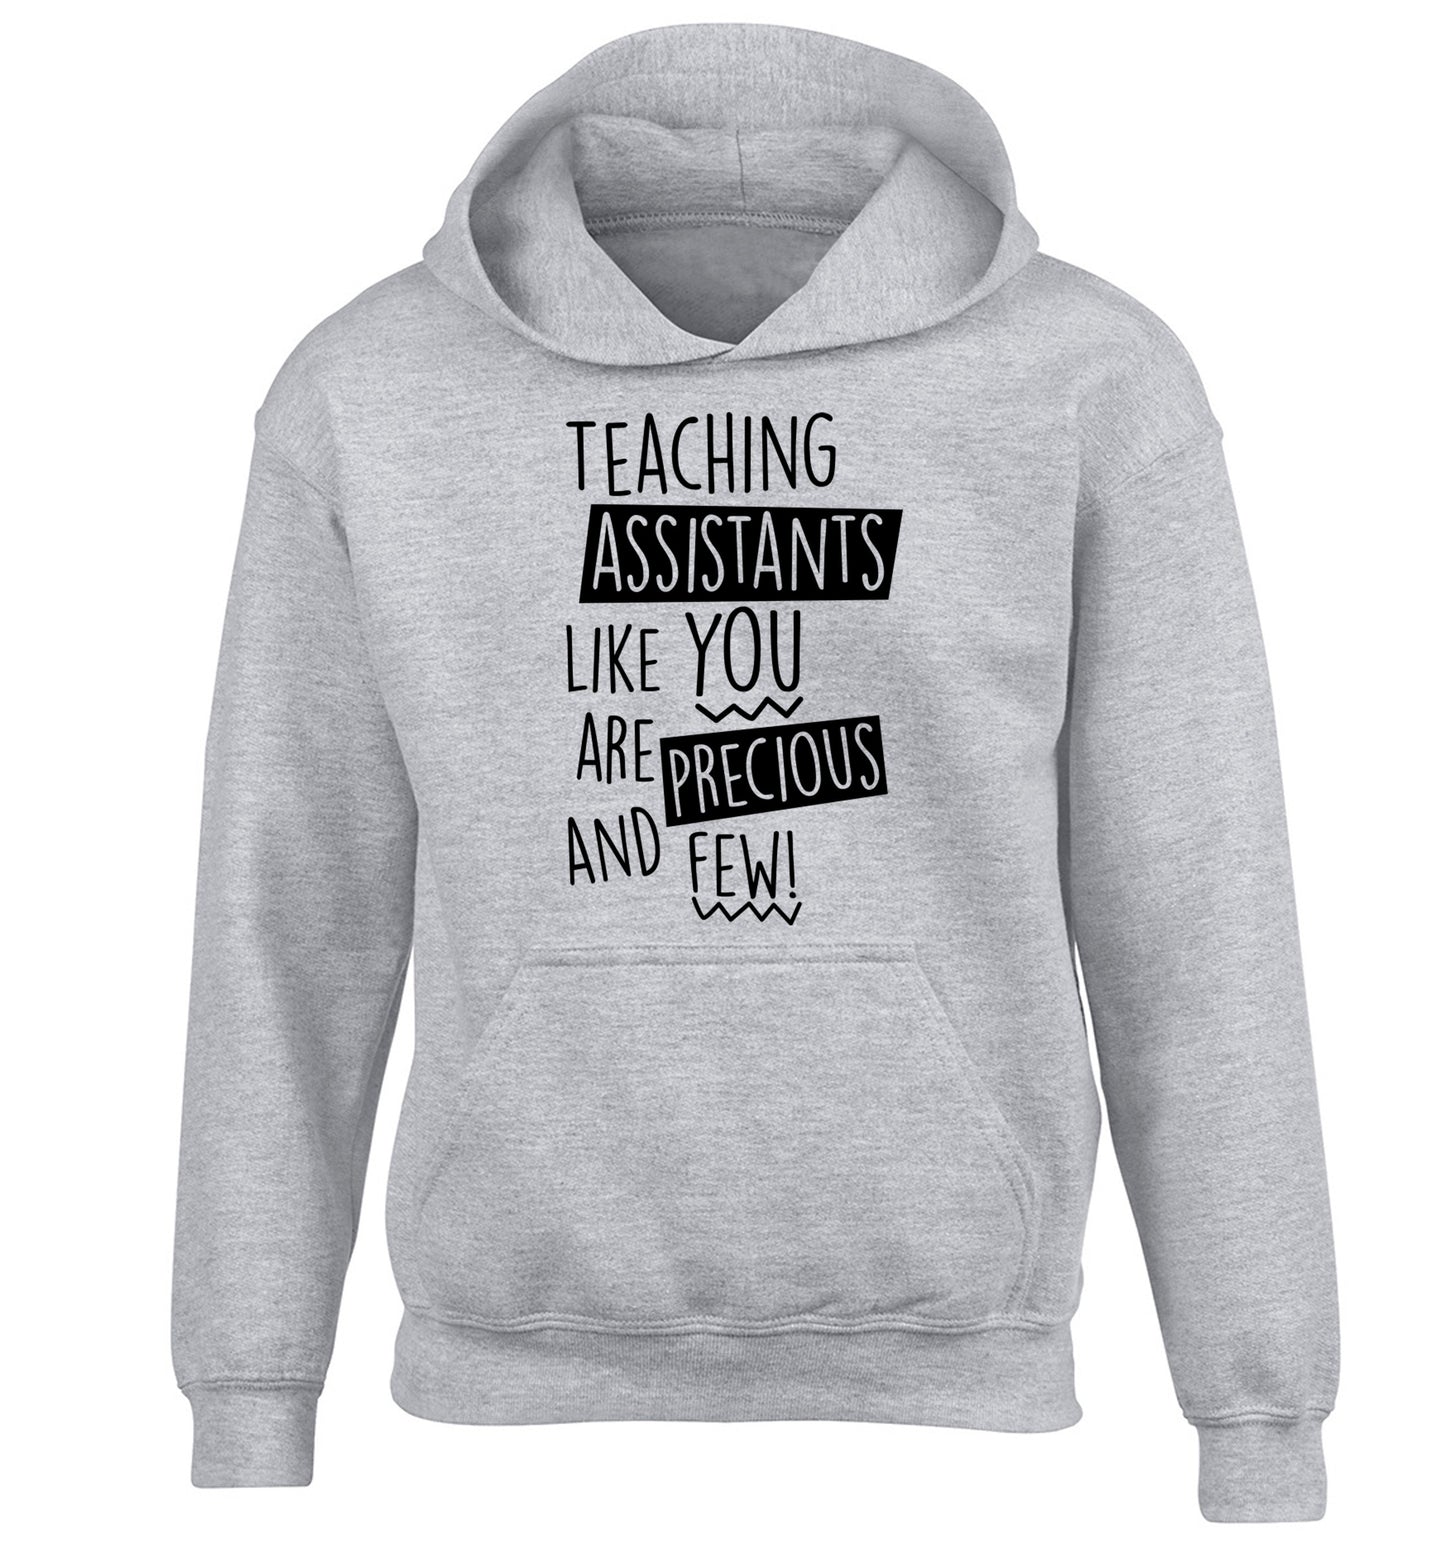 Teaching assistants like you are previous and few! children's grey hoodie 12-14 Years